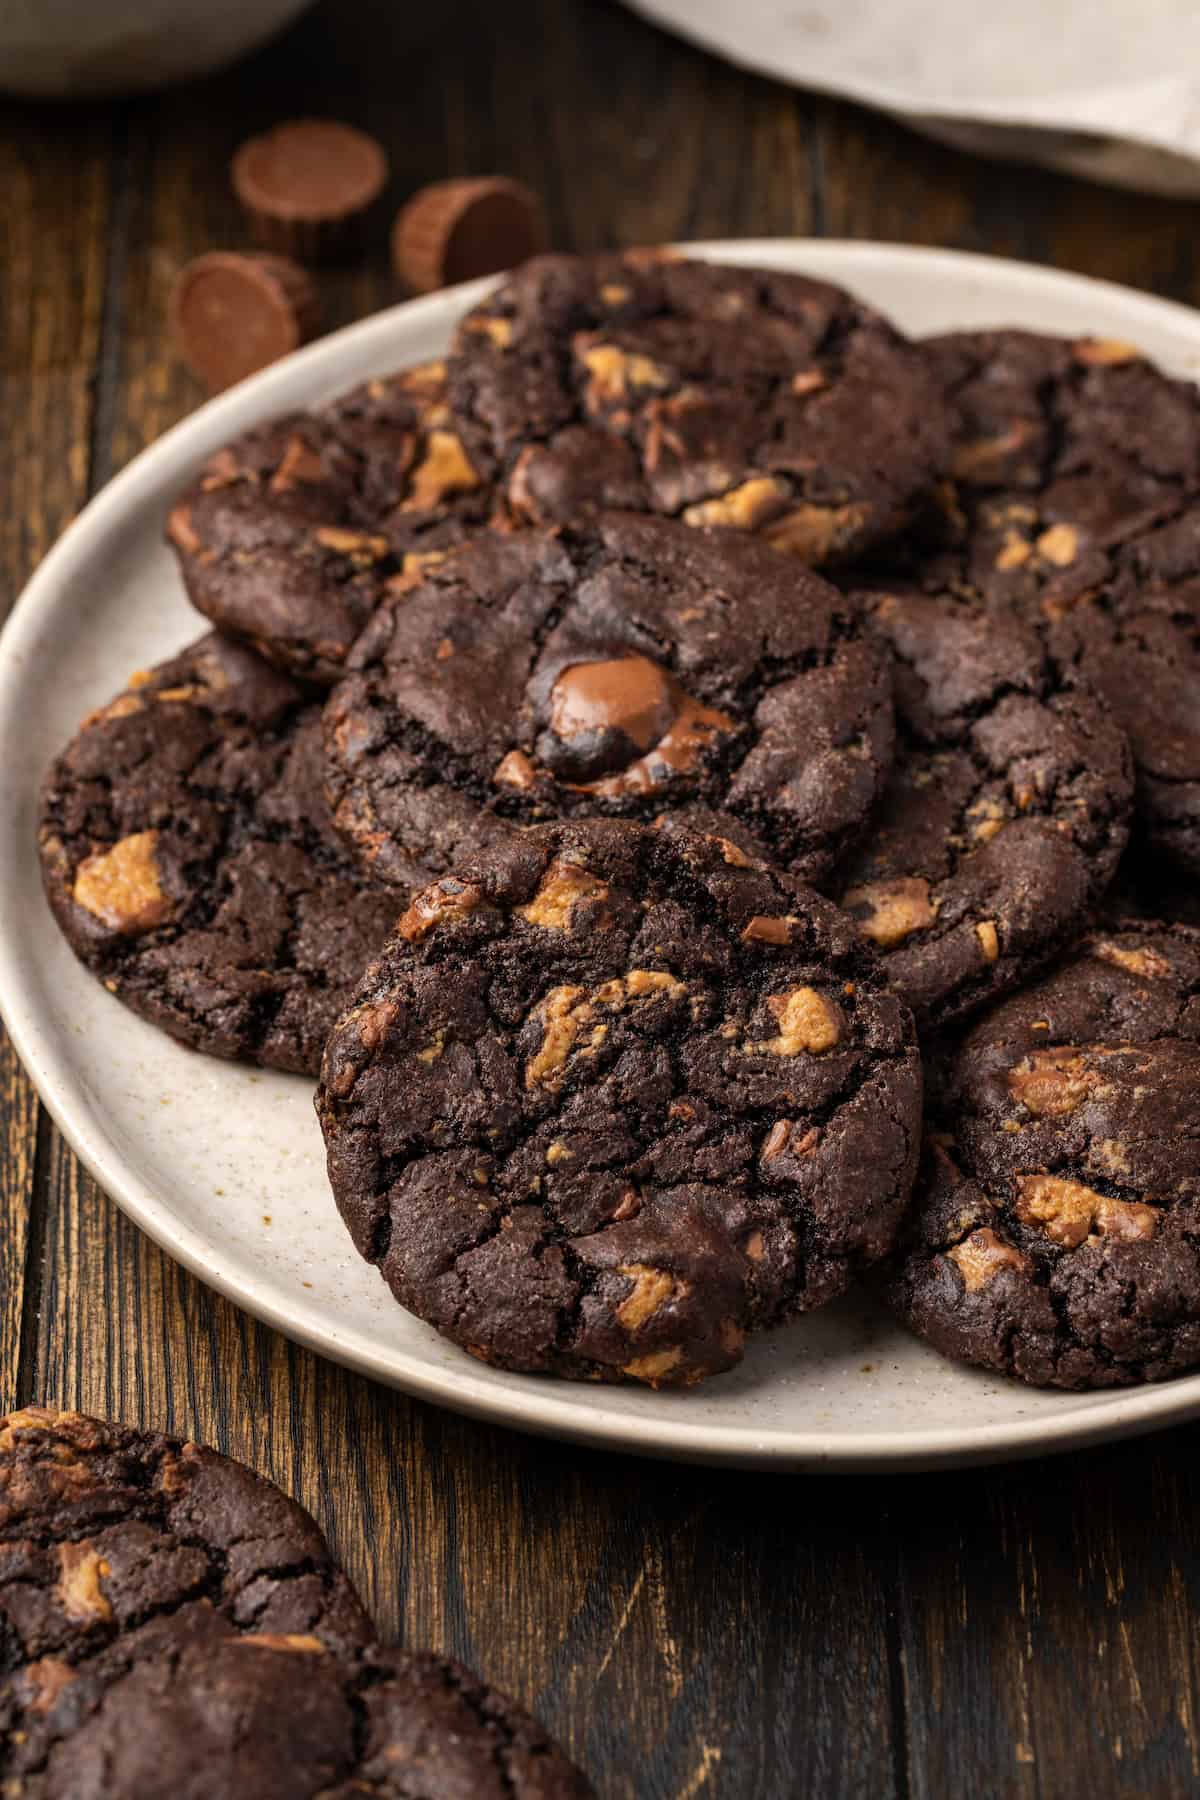 A pile of peanut butter chocolate cookies arranged on a white plate.